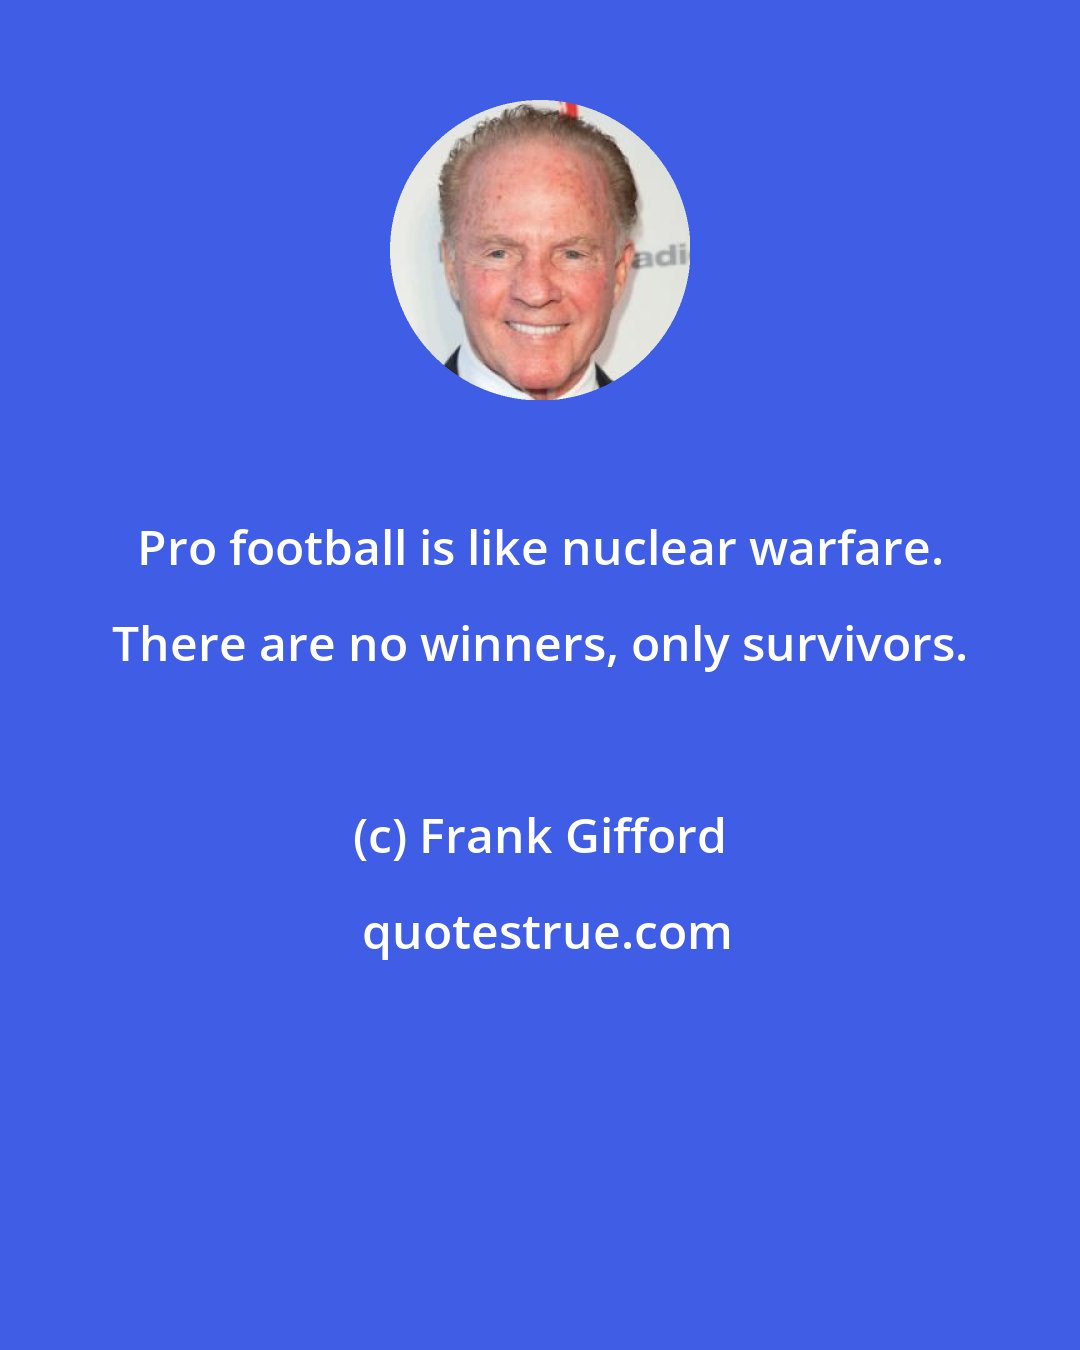 Frank Gifford: Pro football is like nuclear warfare. There are no winners, only survivors.